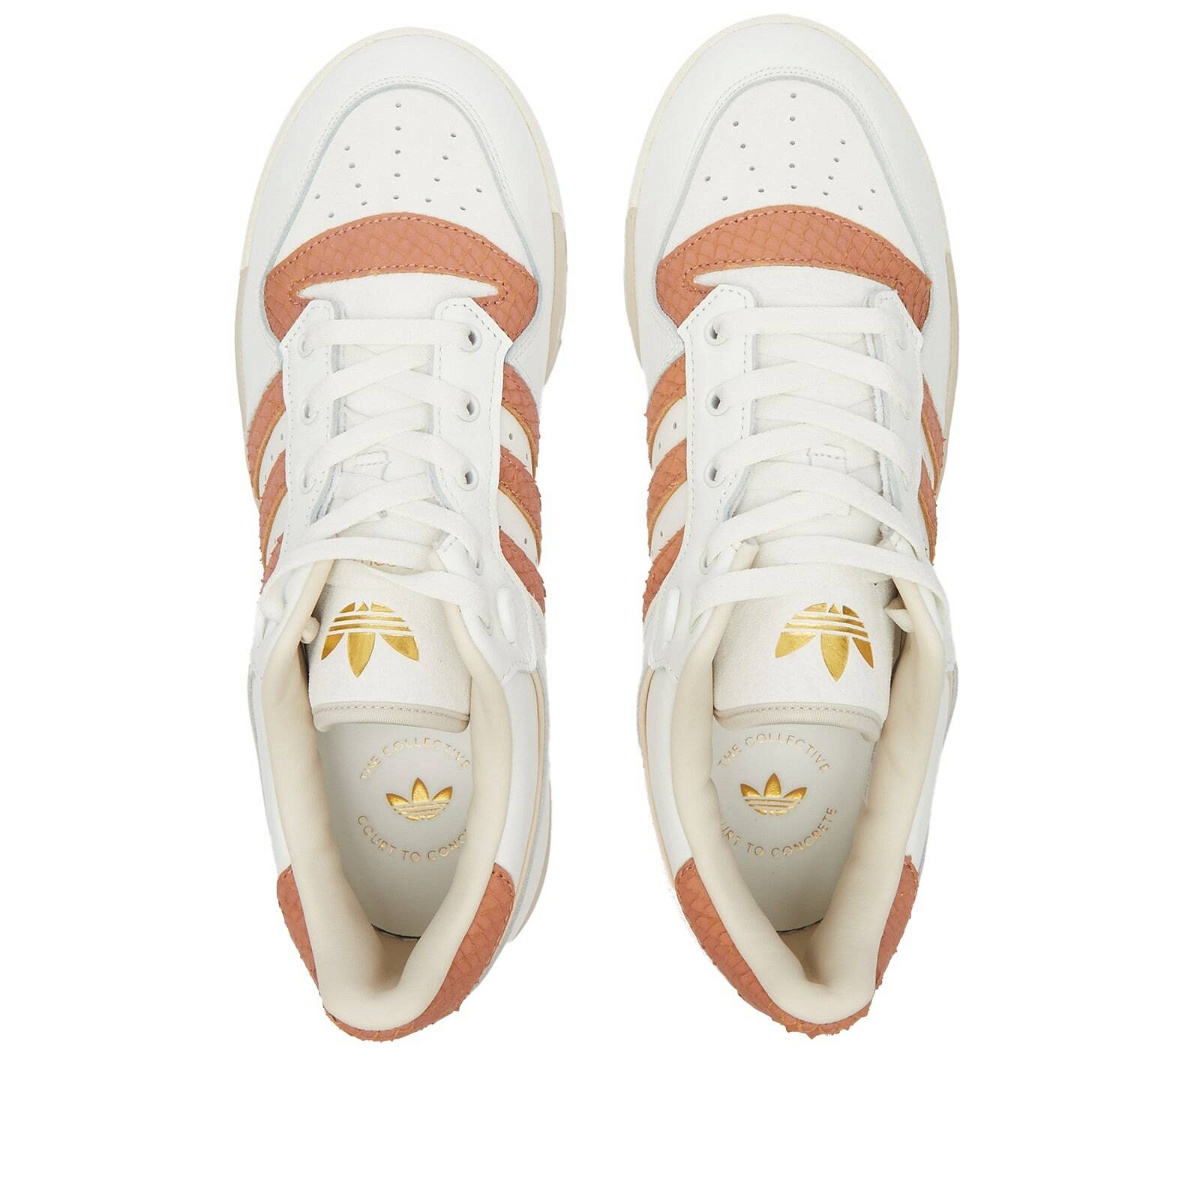 86 in Strata Low Adidas adidas Core Rivalry White/Clay Sneakers